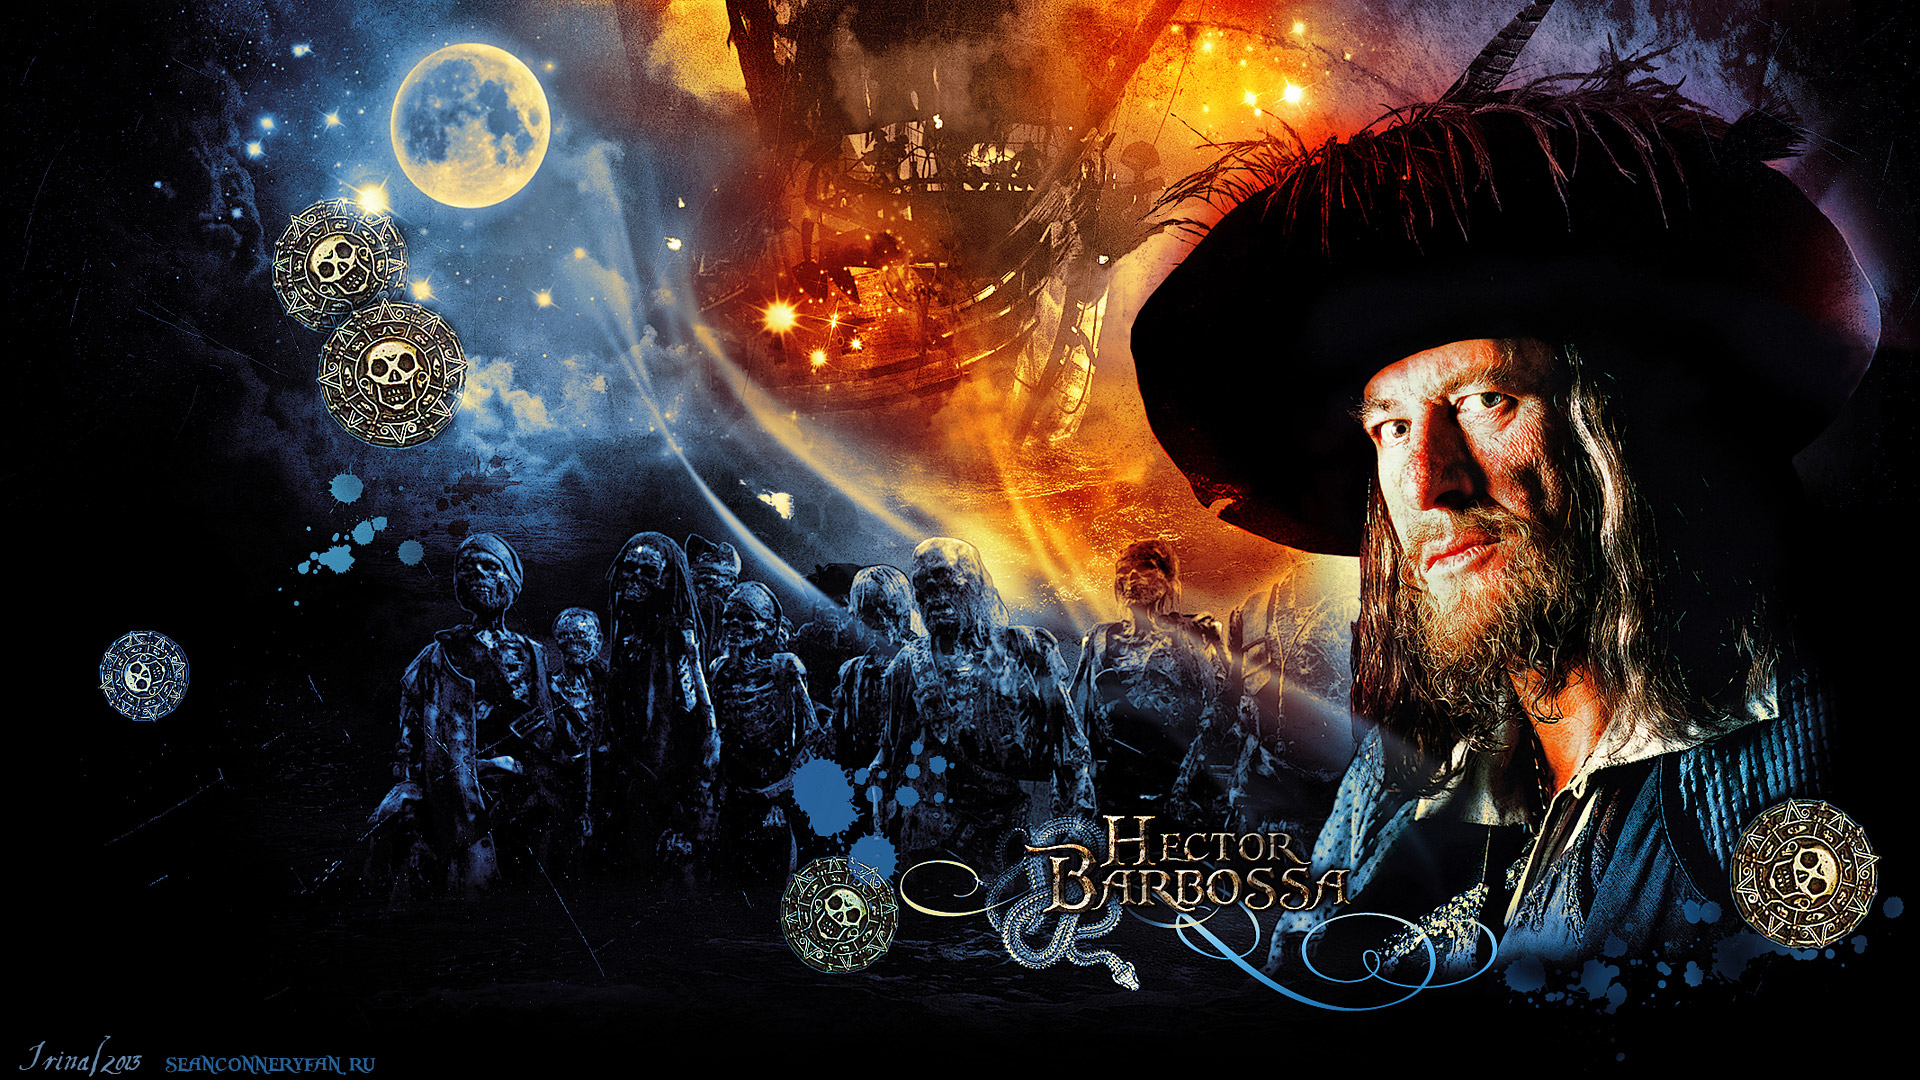   .    (Pirates of the Caribbean. The Curse of the Black Pearl),   (Geoffrey Rush)  Wallpaper